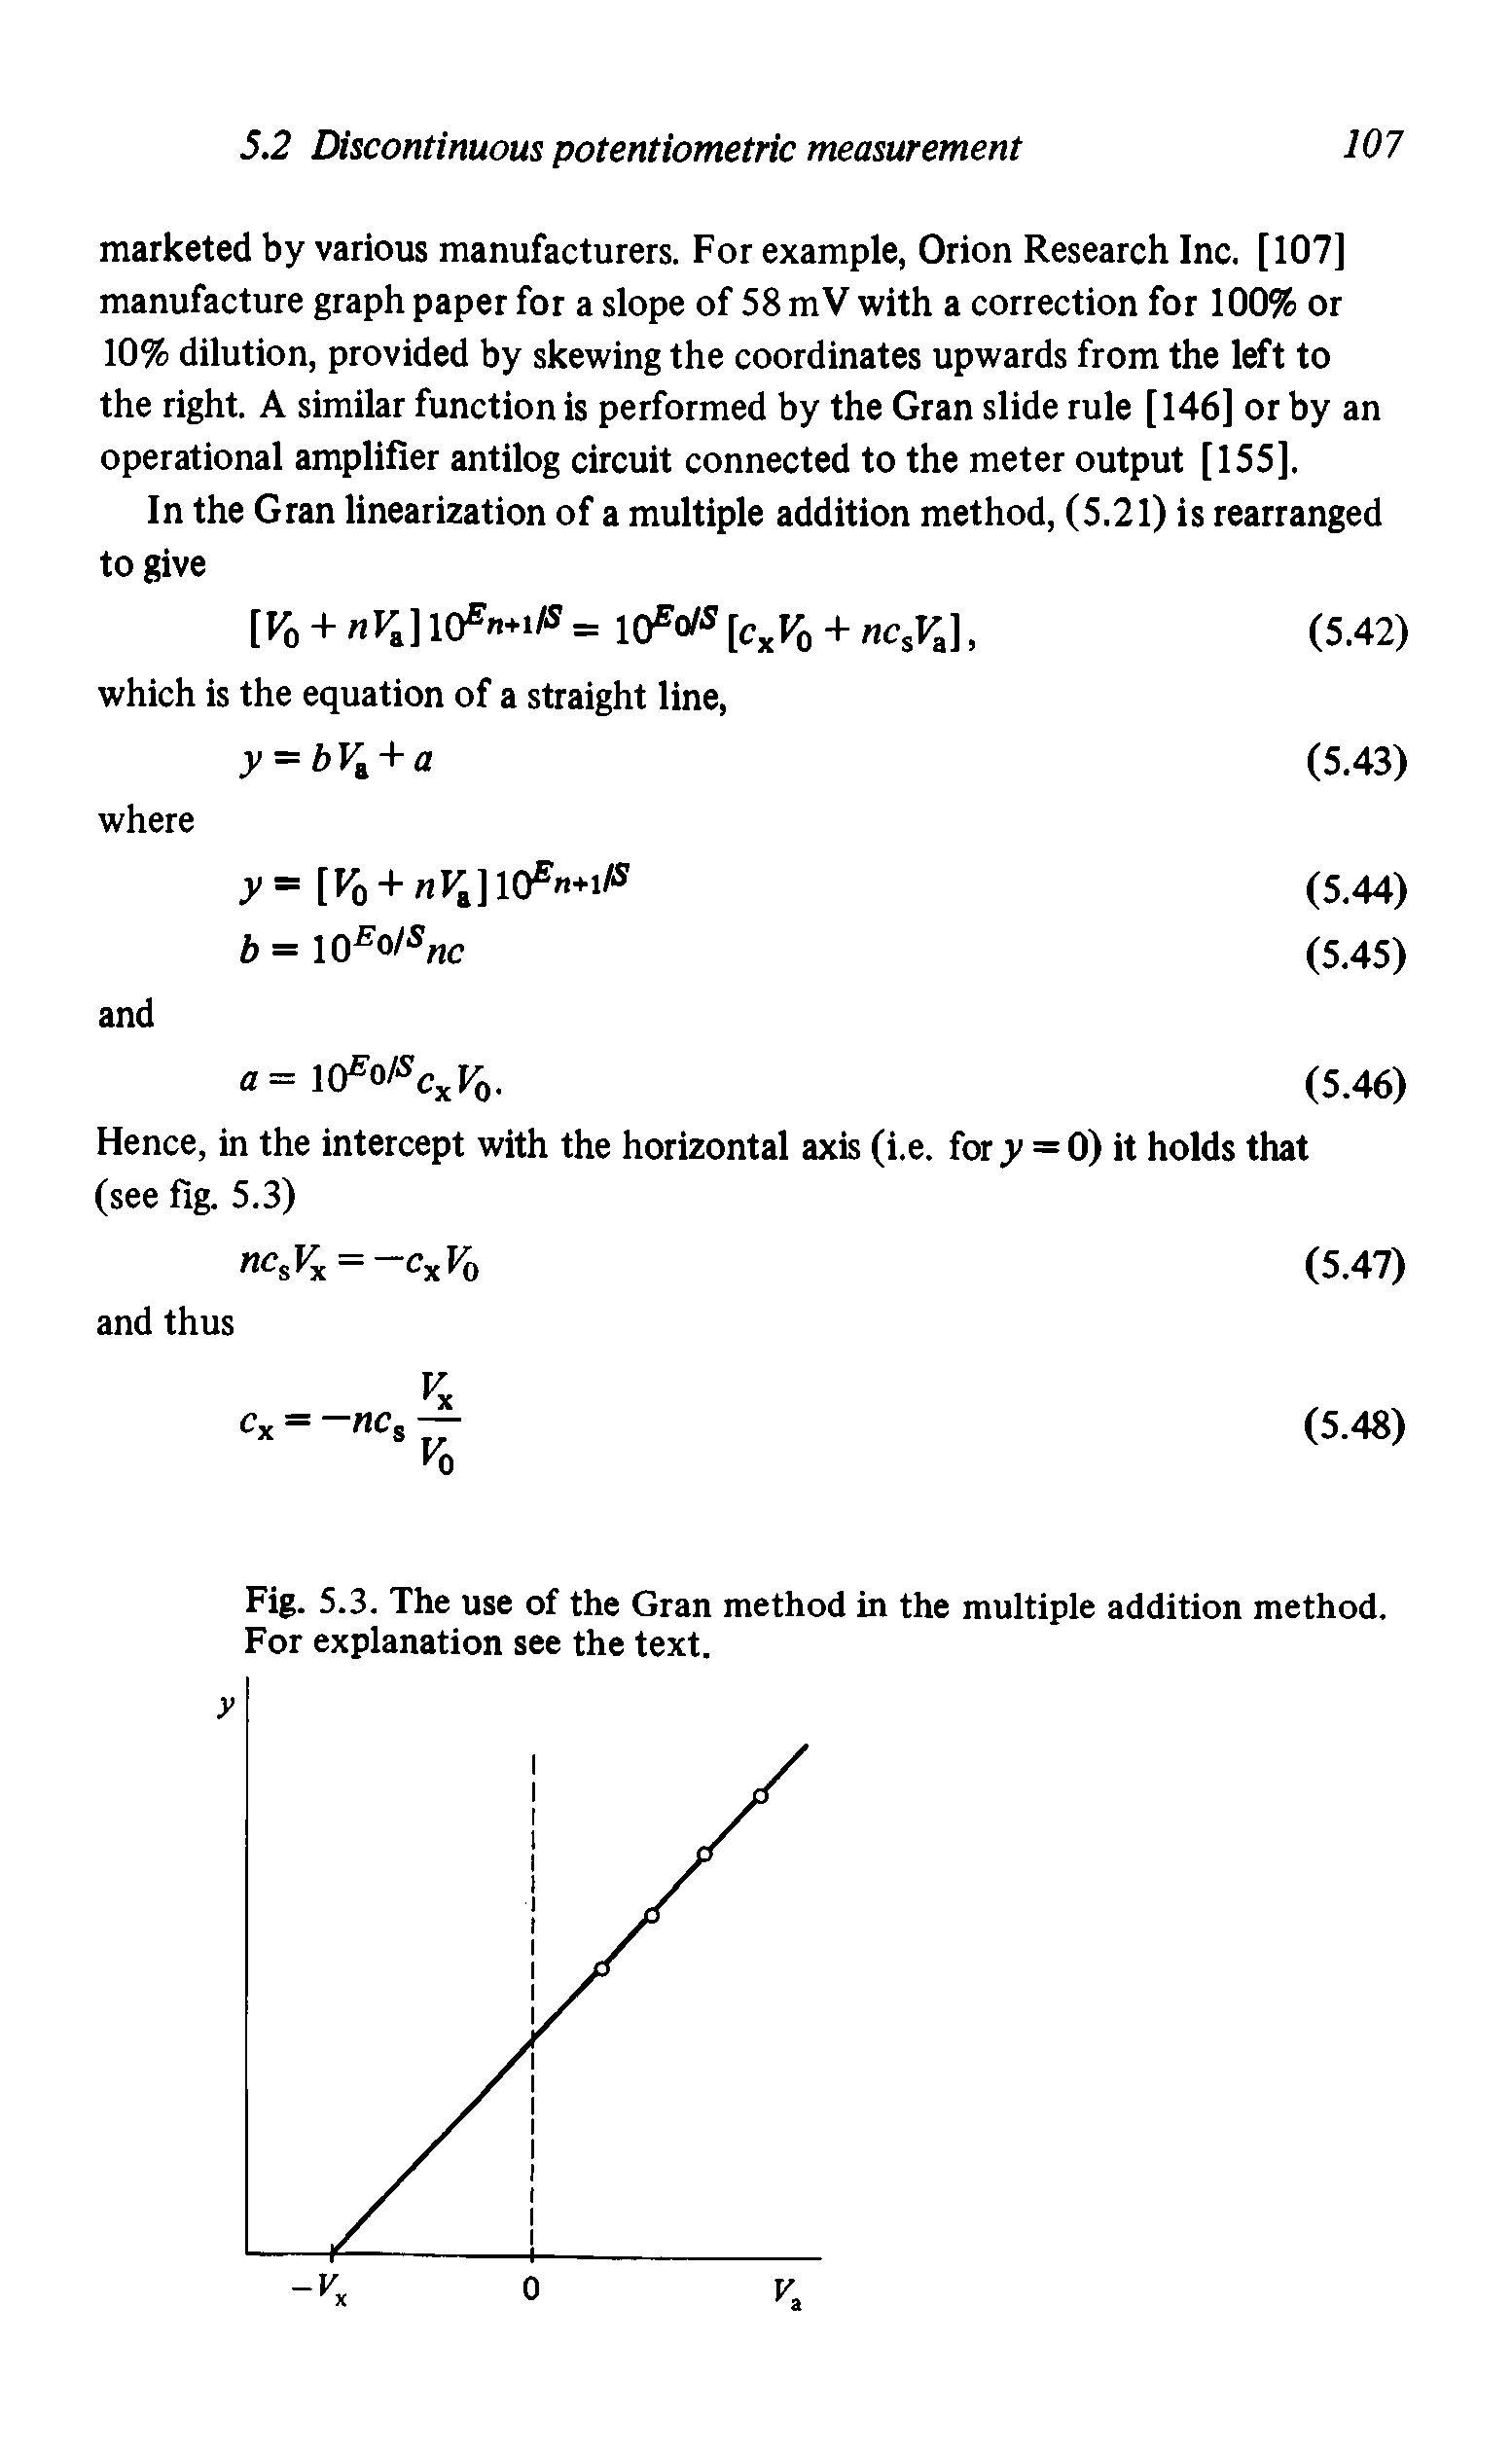 Fig. 5.3. The use of the Gran method in the multiple addition method. For explanation see the text.